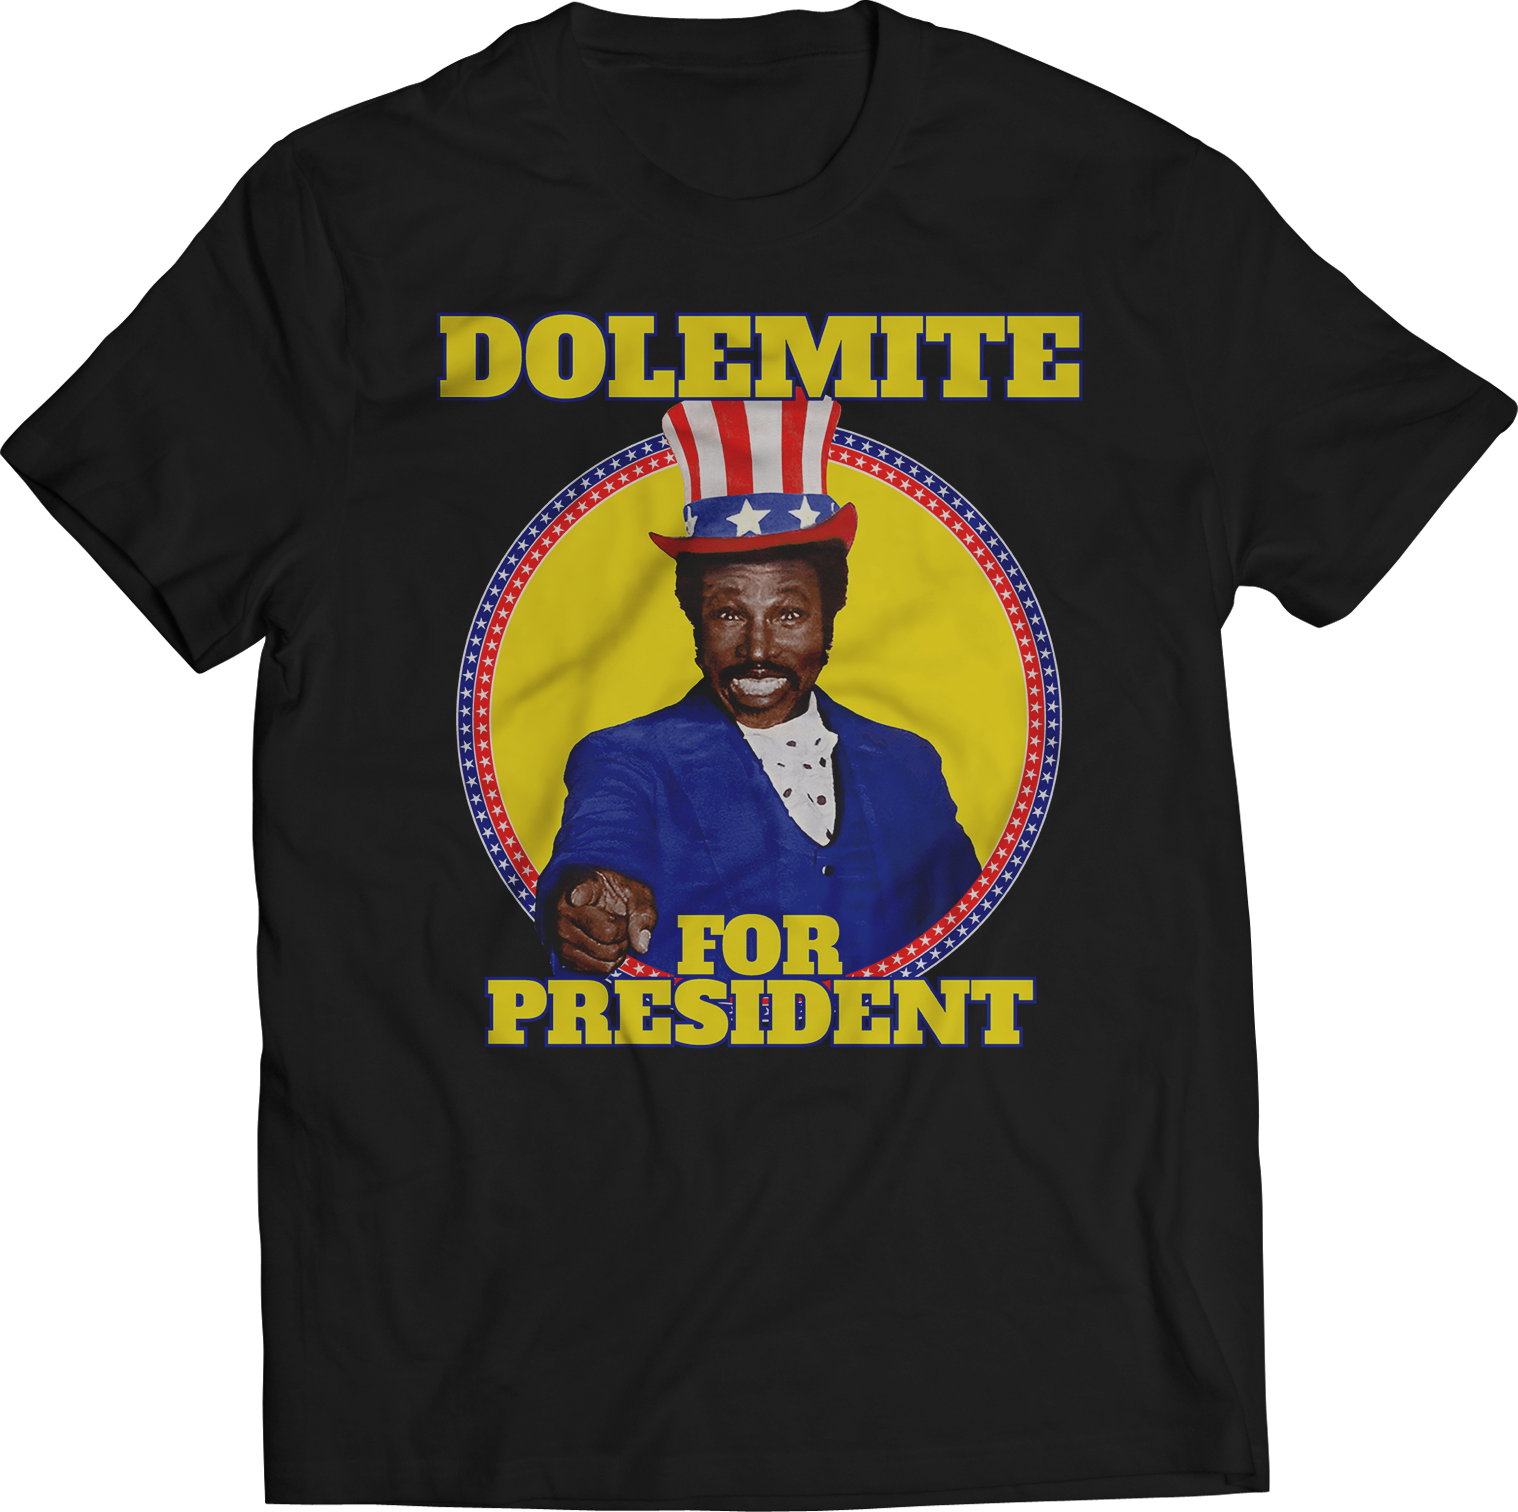 RUDY RAY MOORE DOLEMITE "DOLEMITE FOR PRESIDENT" T-SHIRT